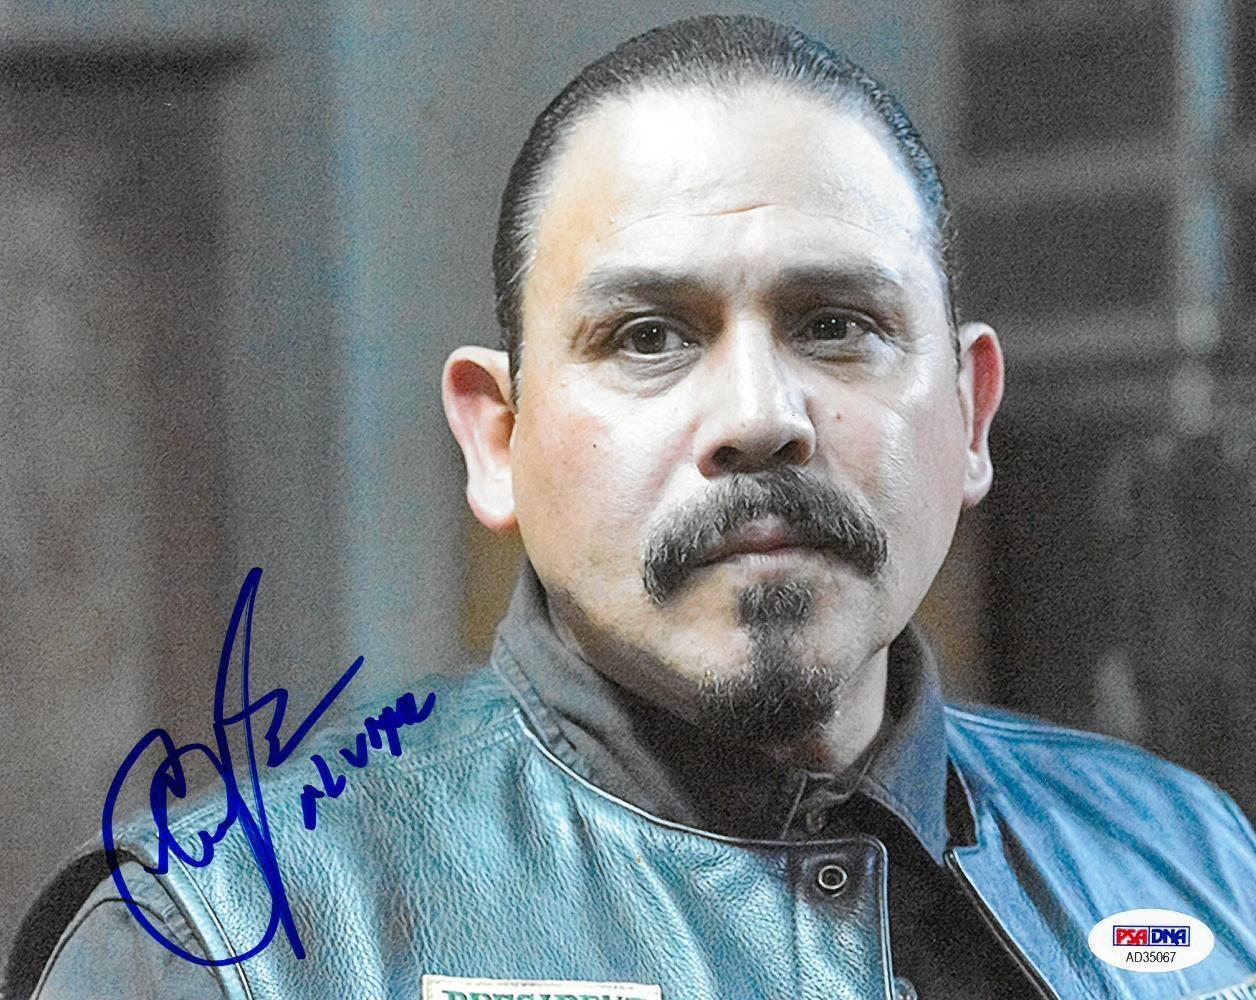 Emilio Rivera Signed Sons of Anarchy Autographed 8x10 Photo Poster painting PSA/DNA #AD35067